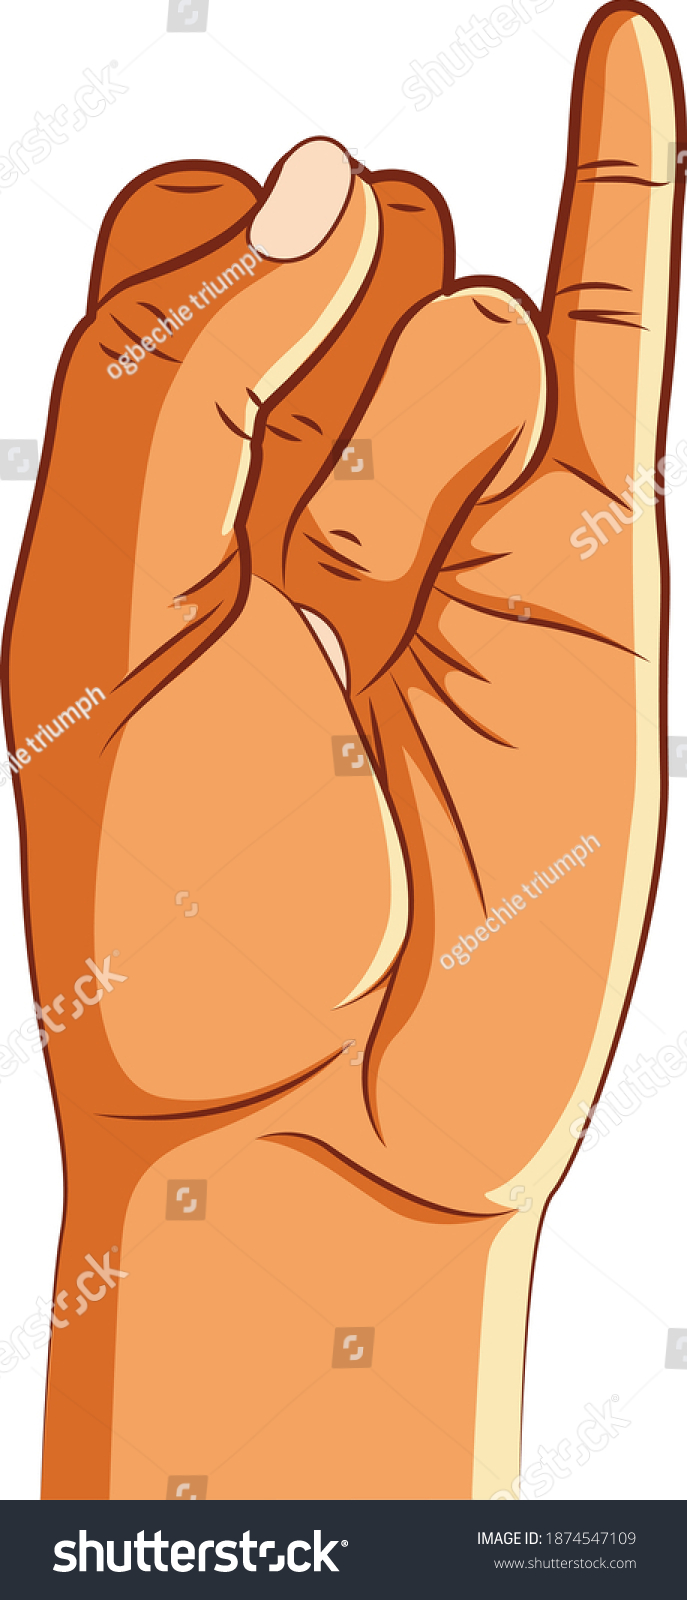 Hand Pose Pinky Swear Vector Illustration Royalty Free Stock Vector 1874547109 